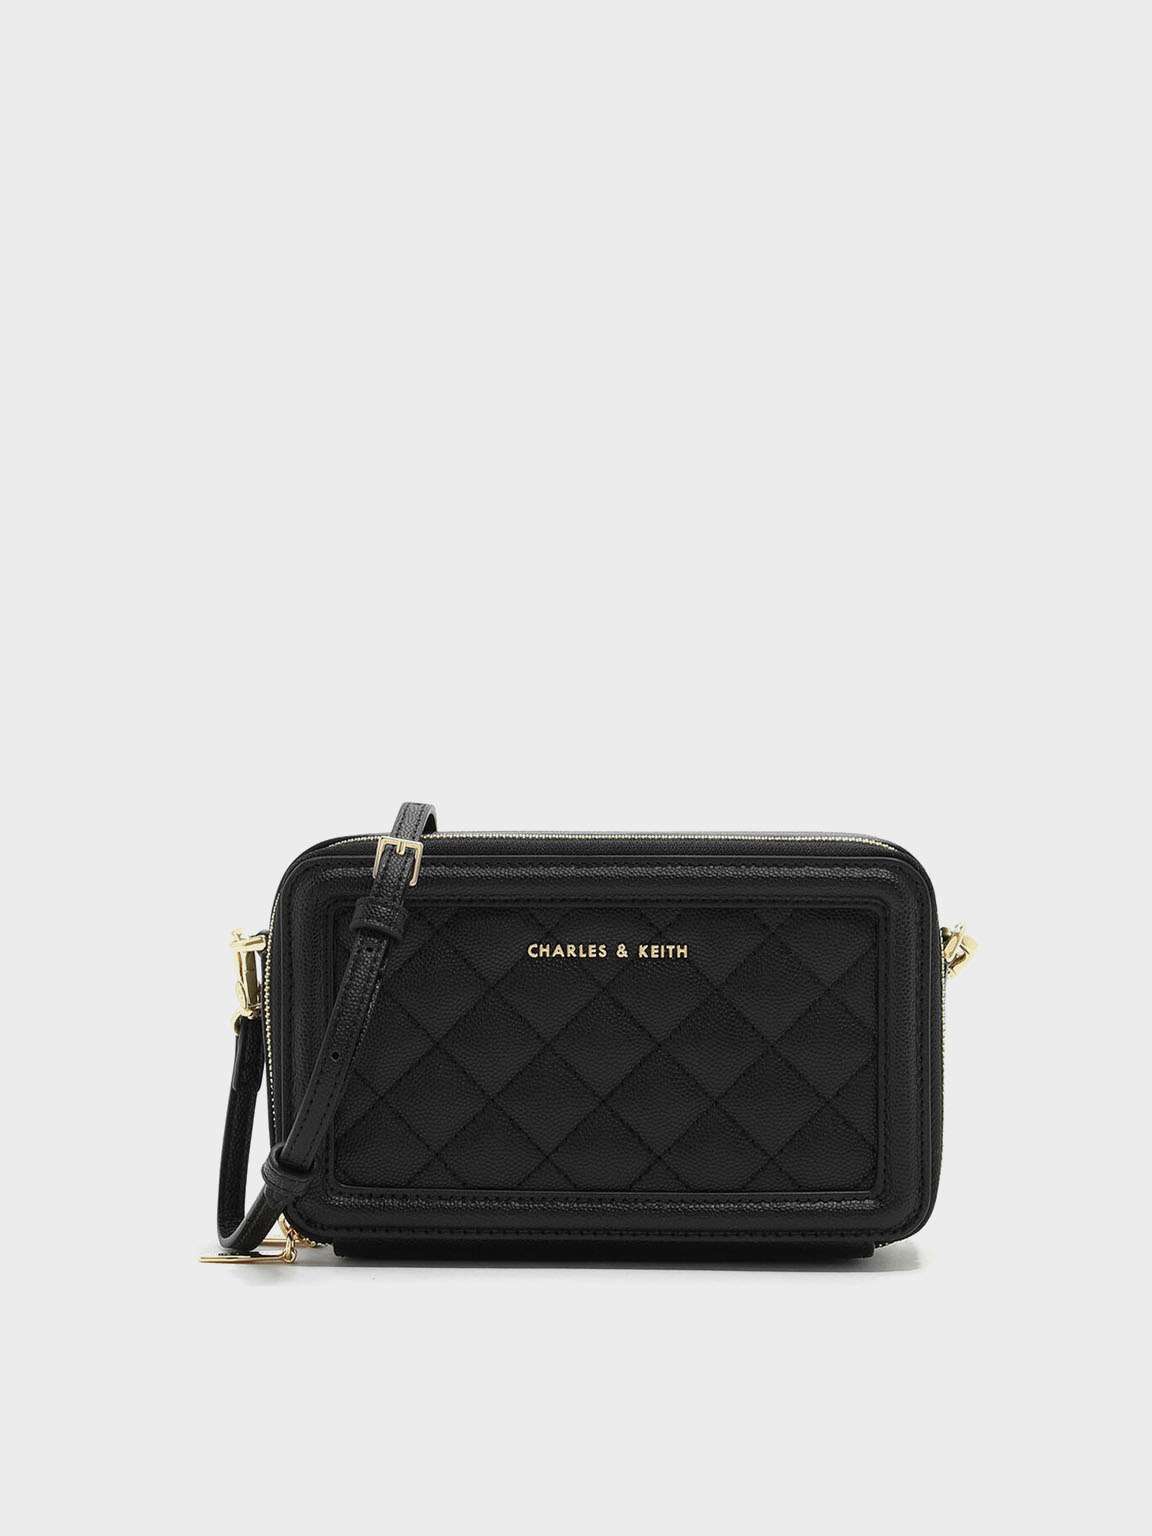 Charles & Keith Women's Quilted Boxy Long Wallet